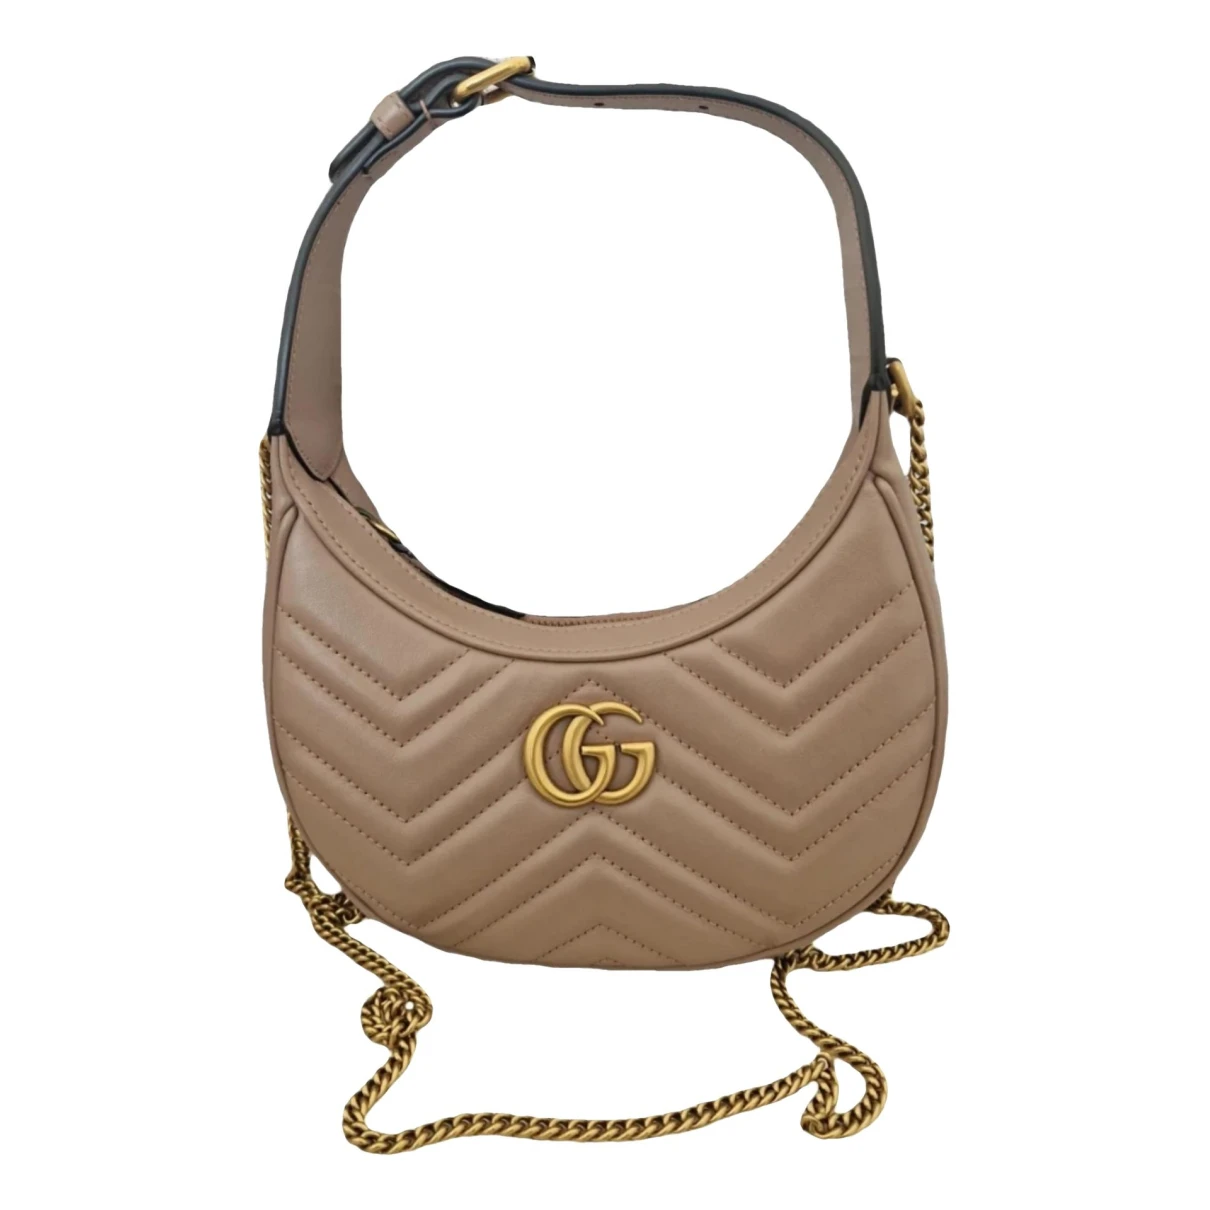 Pre-owned Gucci Gg Marmont Leather Crossbody Bag In Pink